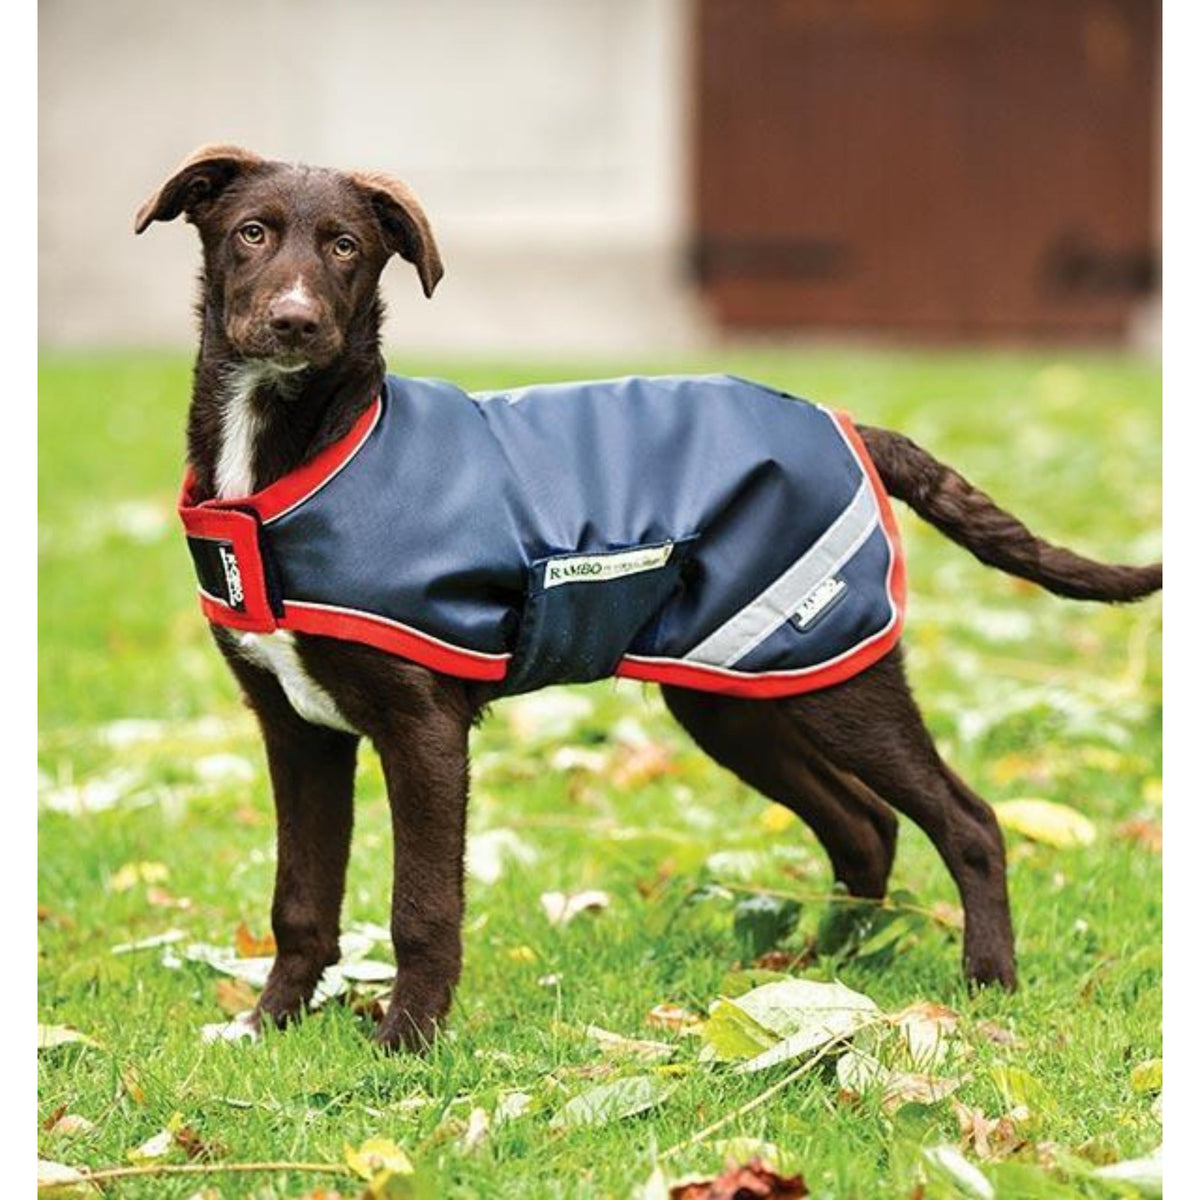 Dog wearing navy rug with red trimming and reflective piping.